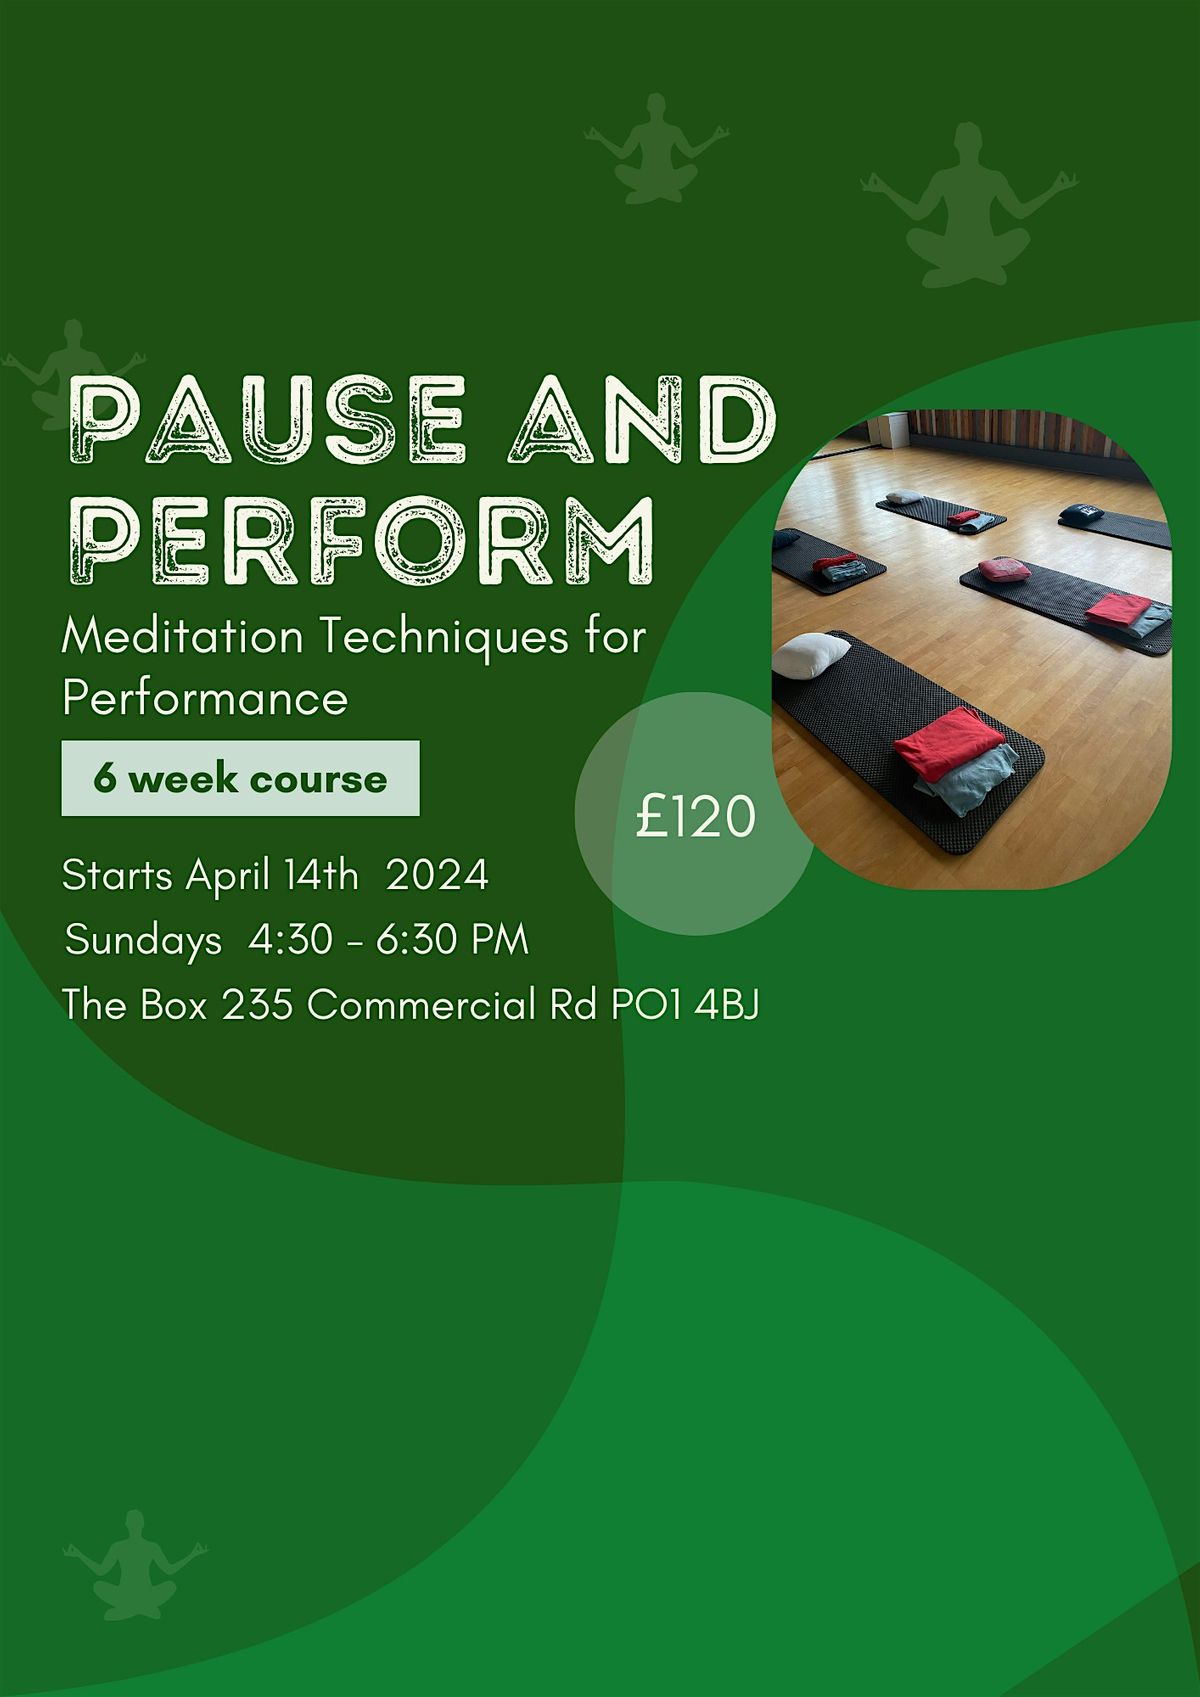 Pause and Perform -  A 6 Week Course